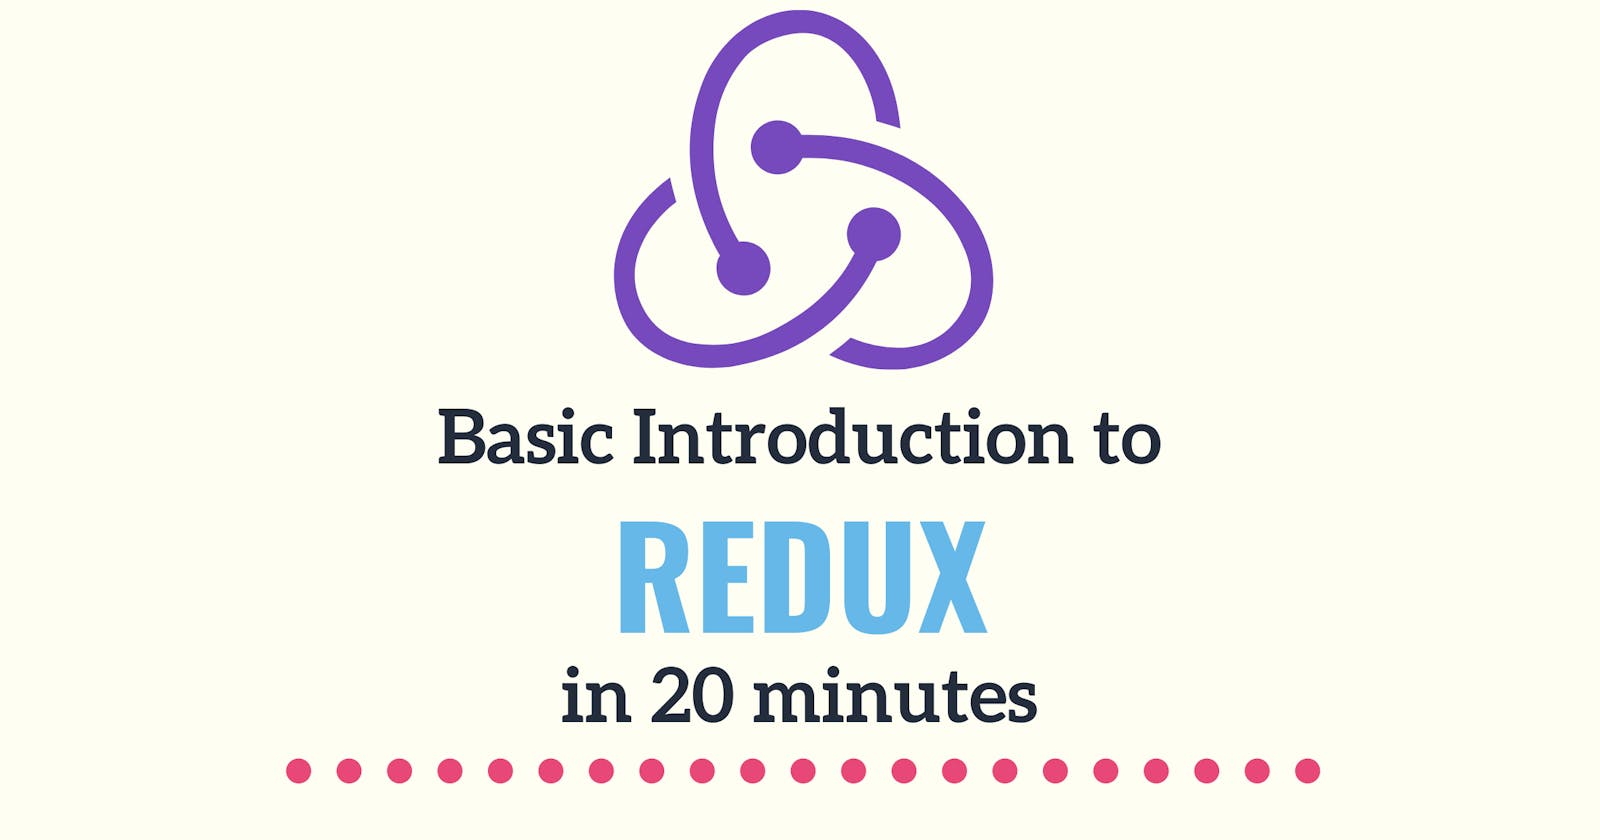 Basics of Redux in 20 minutes